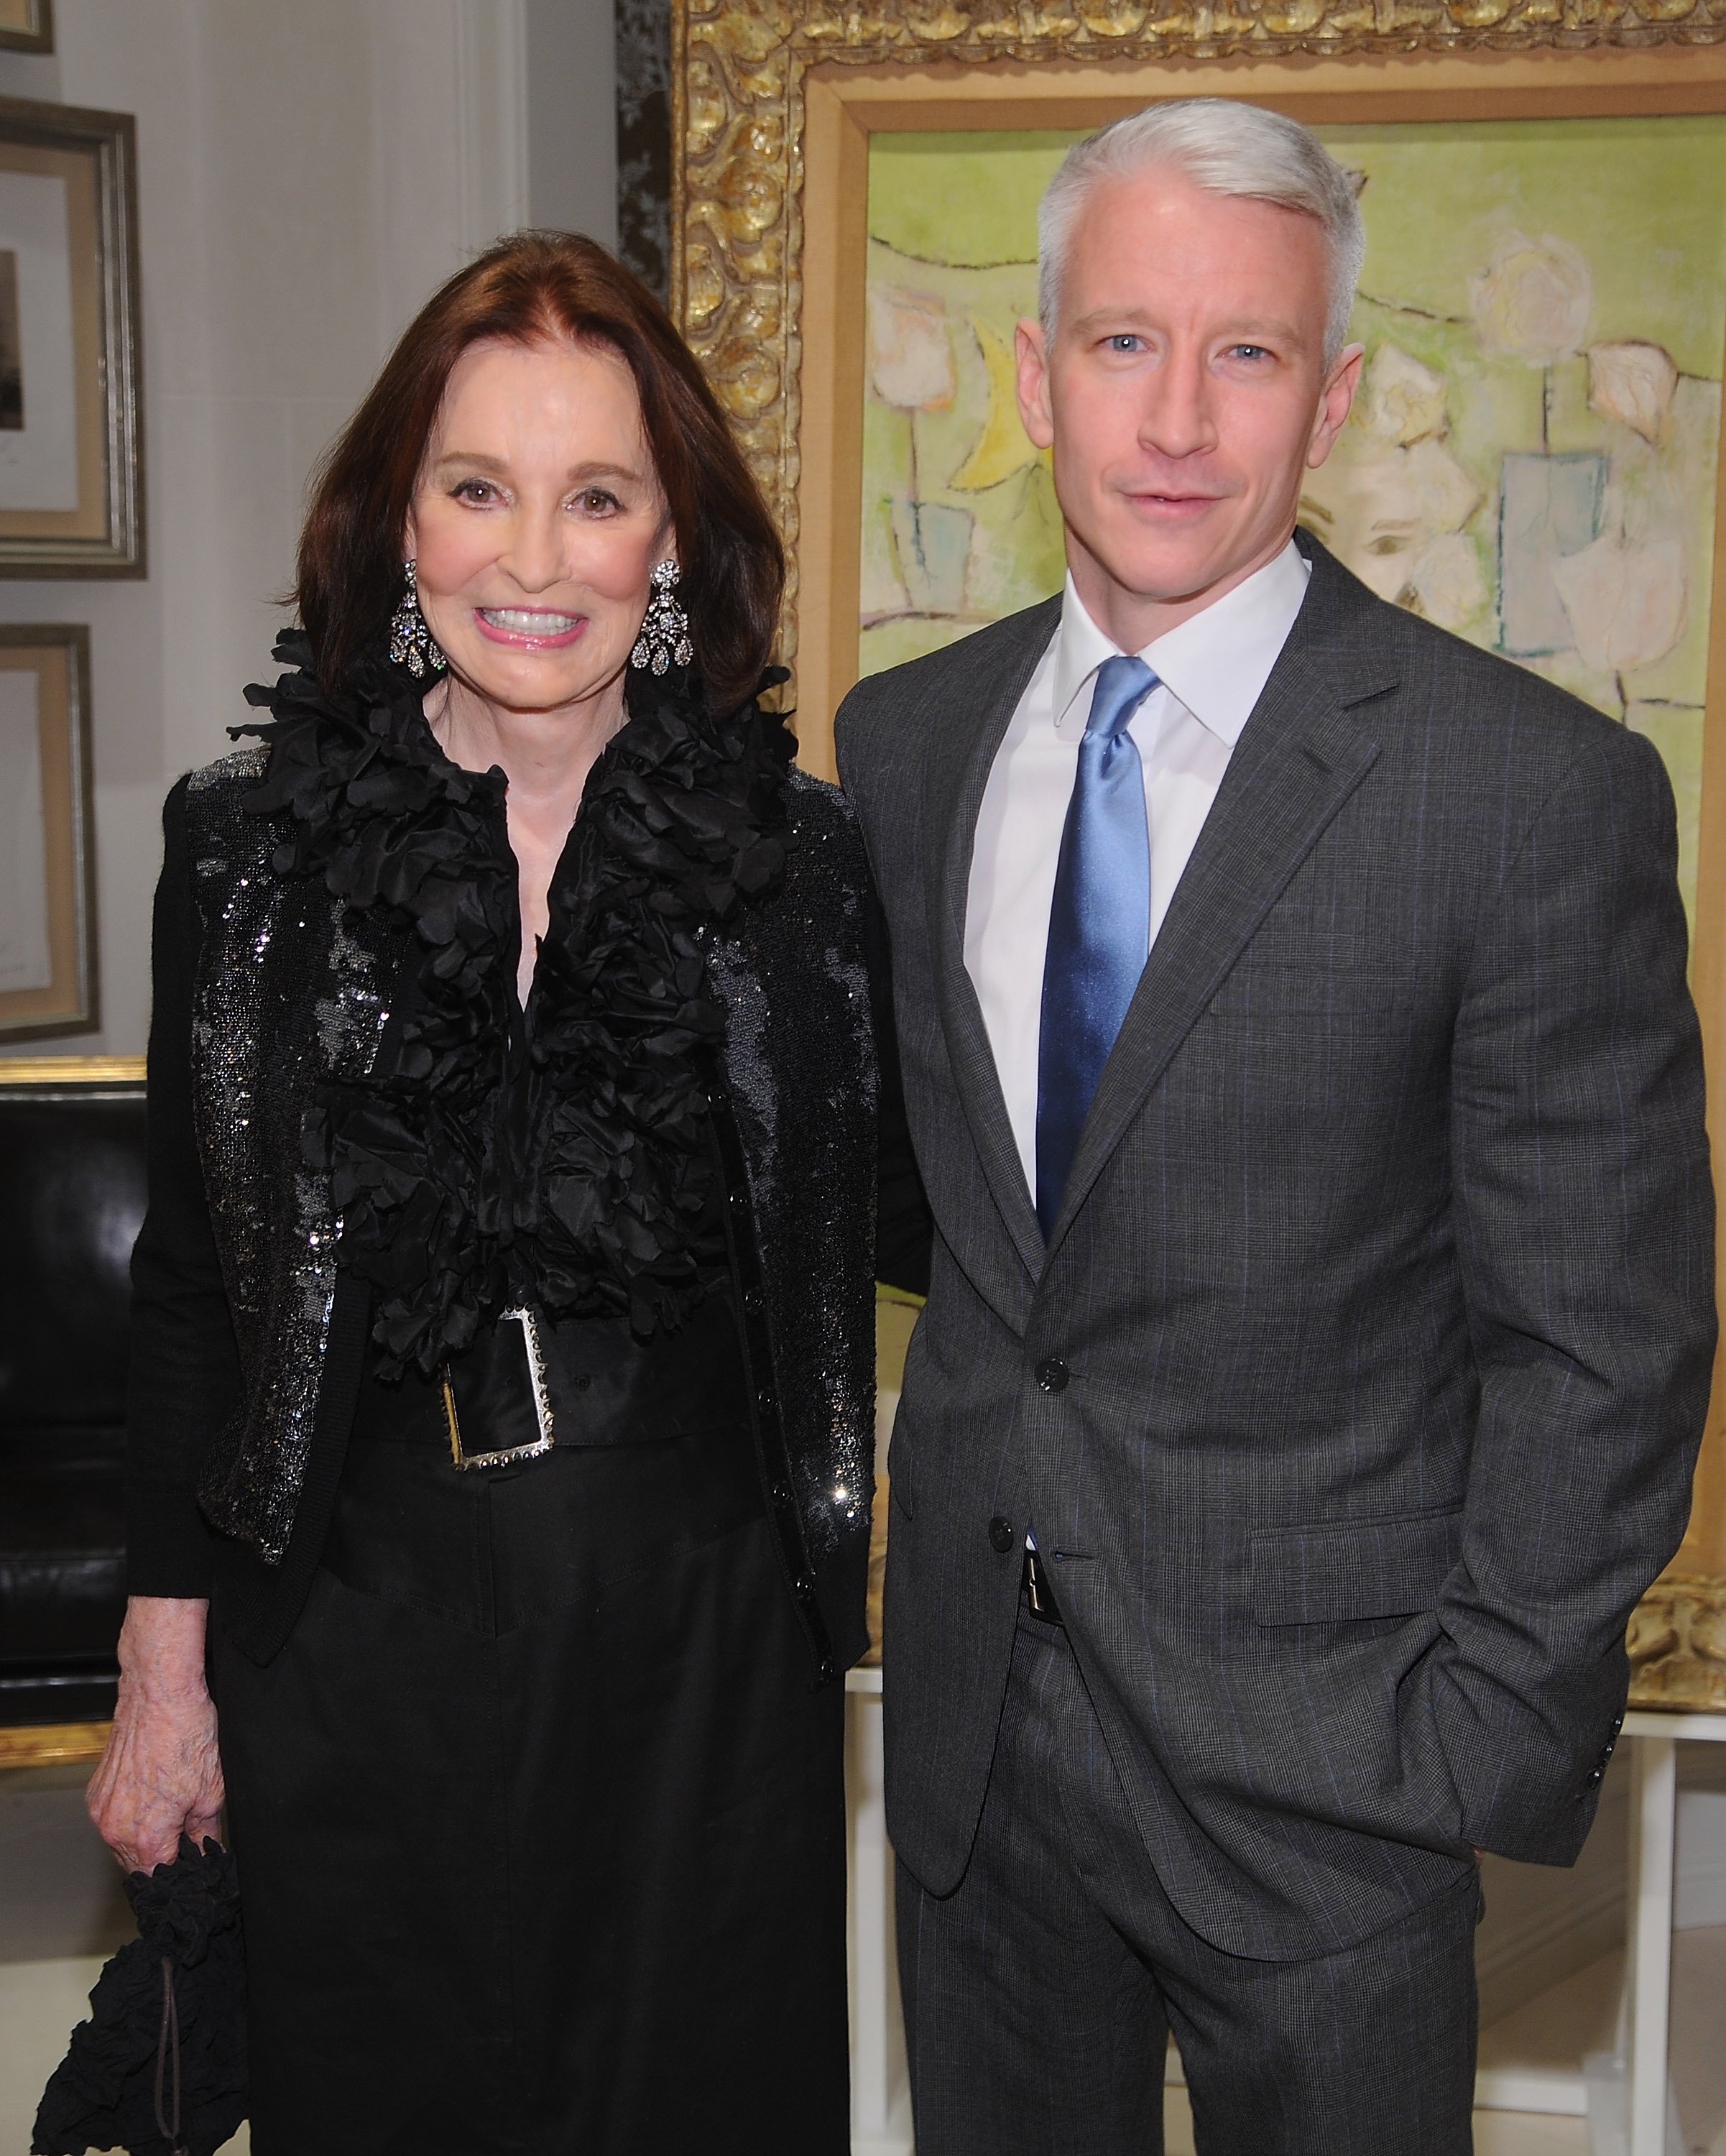 Gloria Vanderbilt and Anderson Cooper attend the launch party for "The World of Gloria Vanderbilt" at the Ralph Lauren Women's Boutique on November 4, 2010, in New York City. | Source: Getty Images